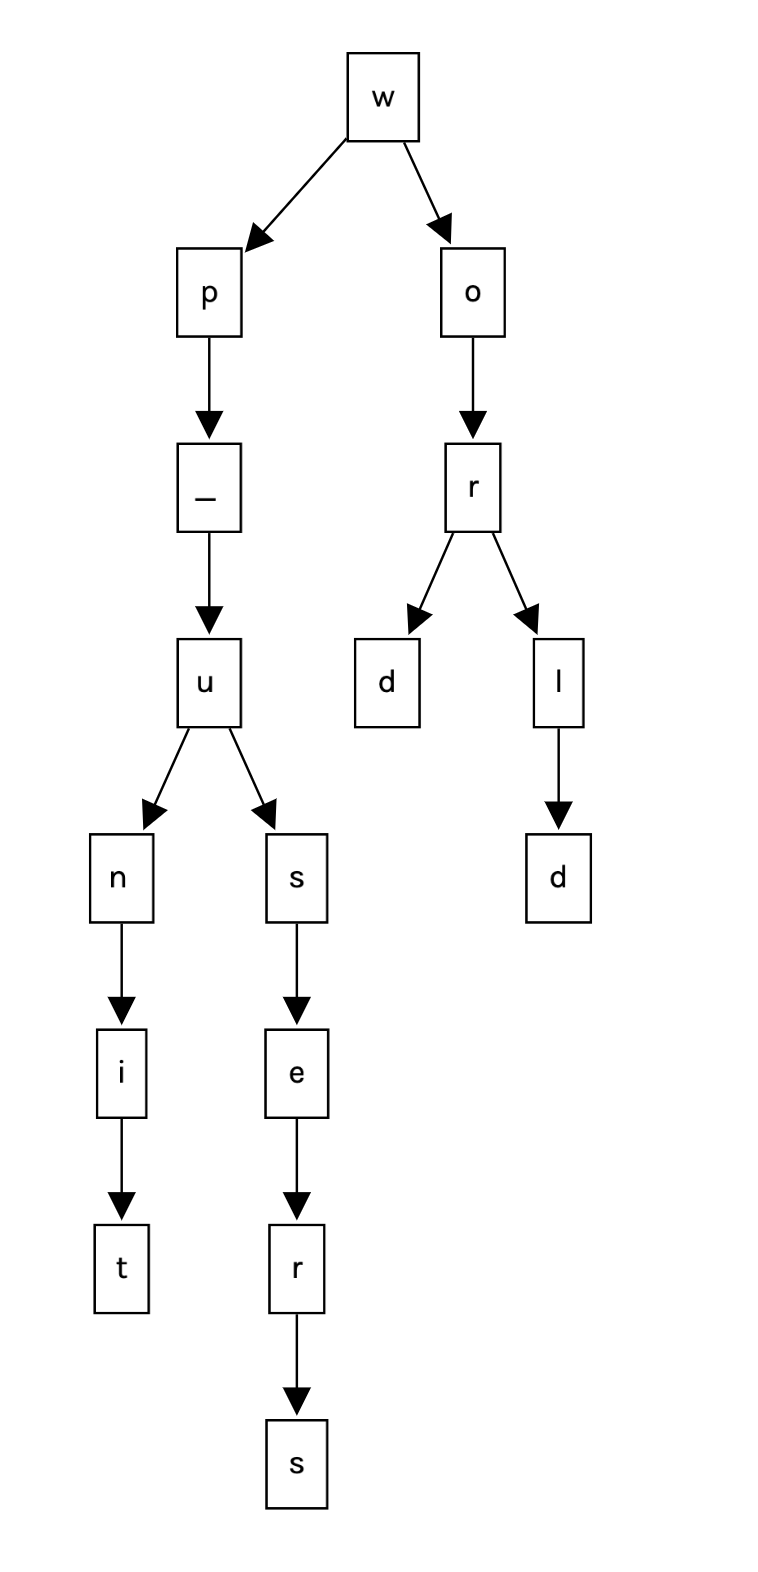 trie data structure